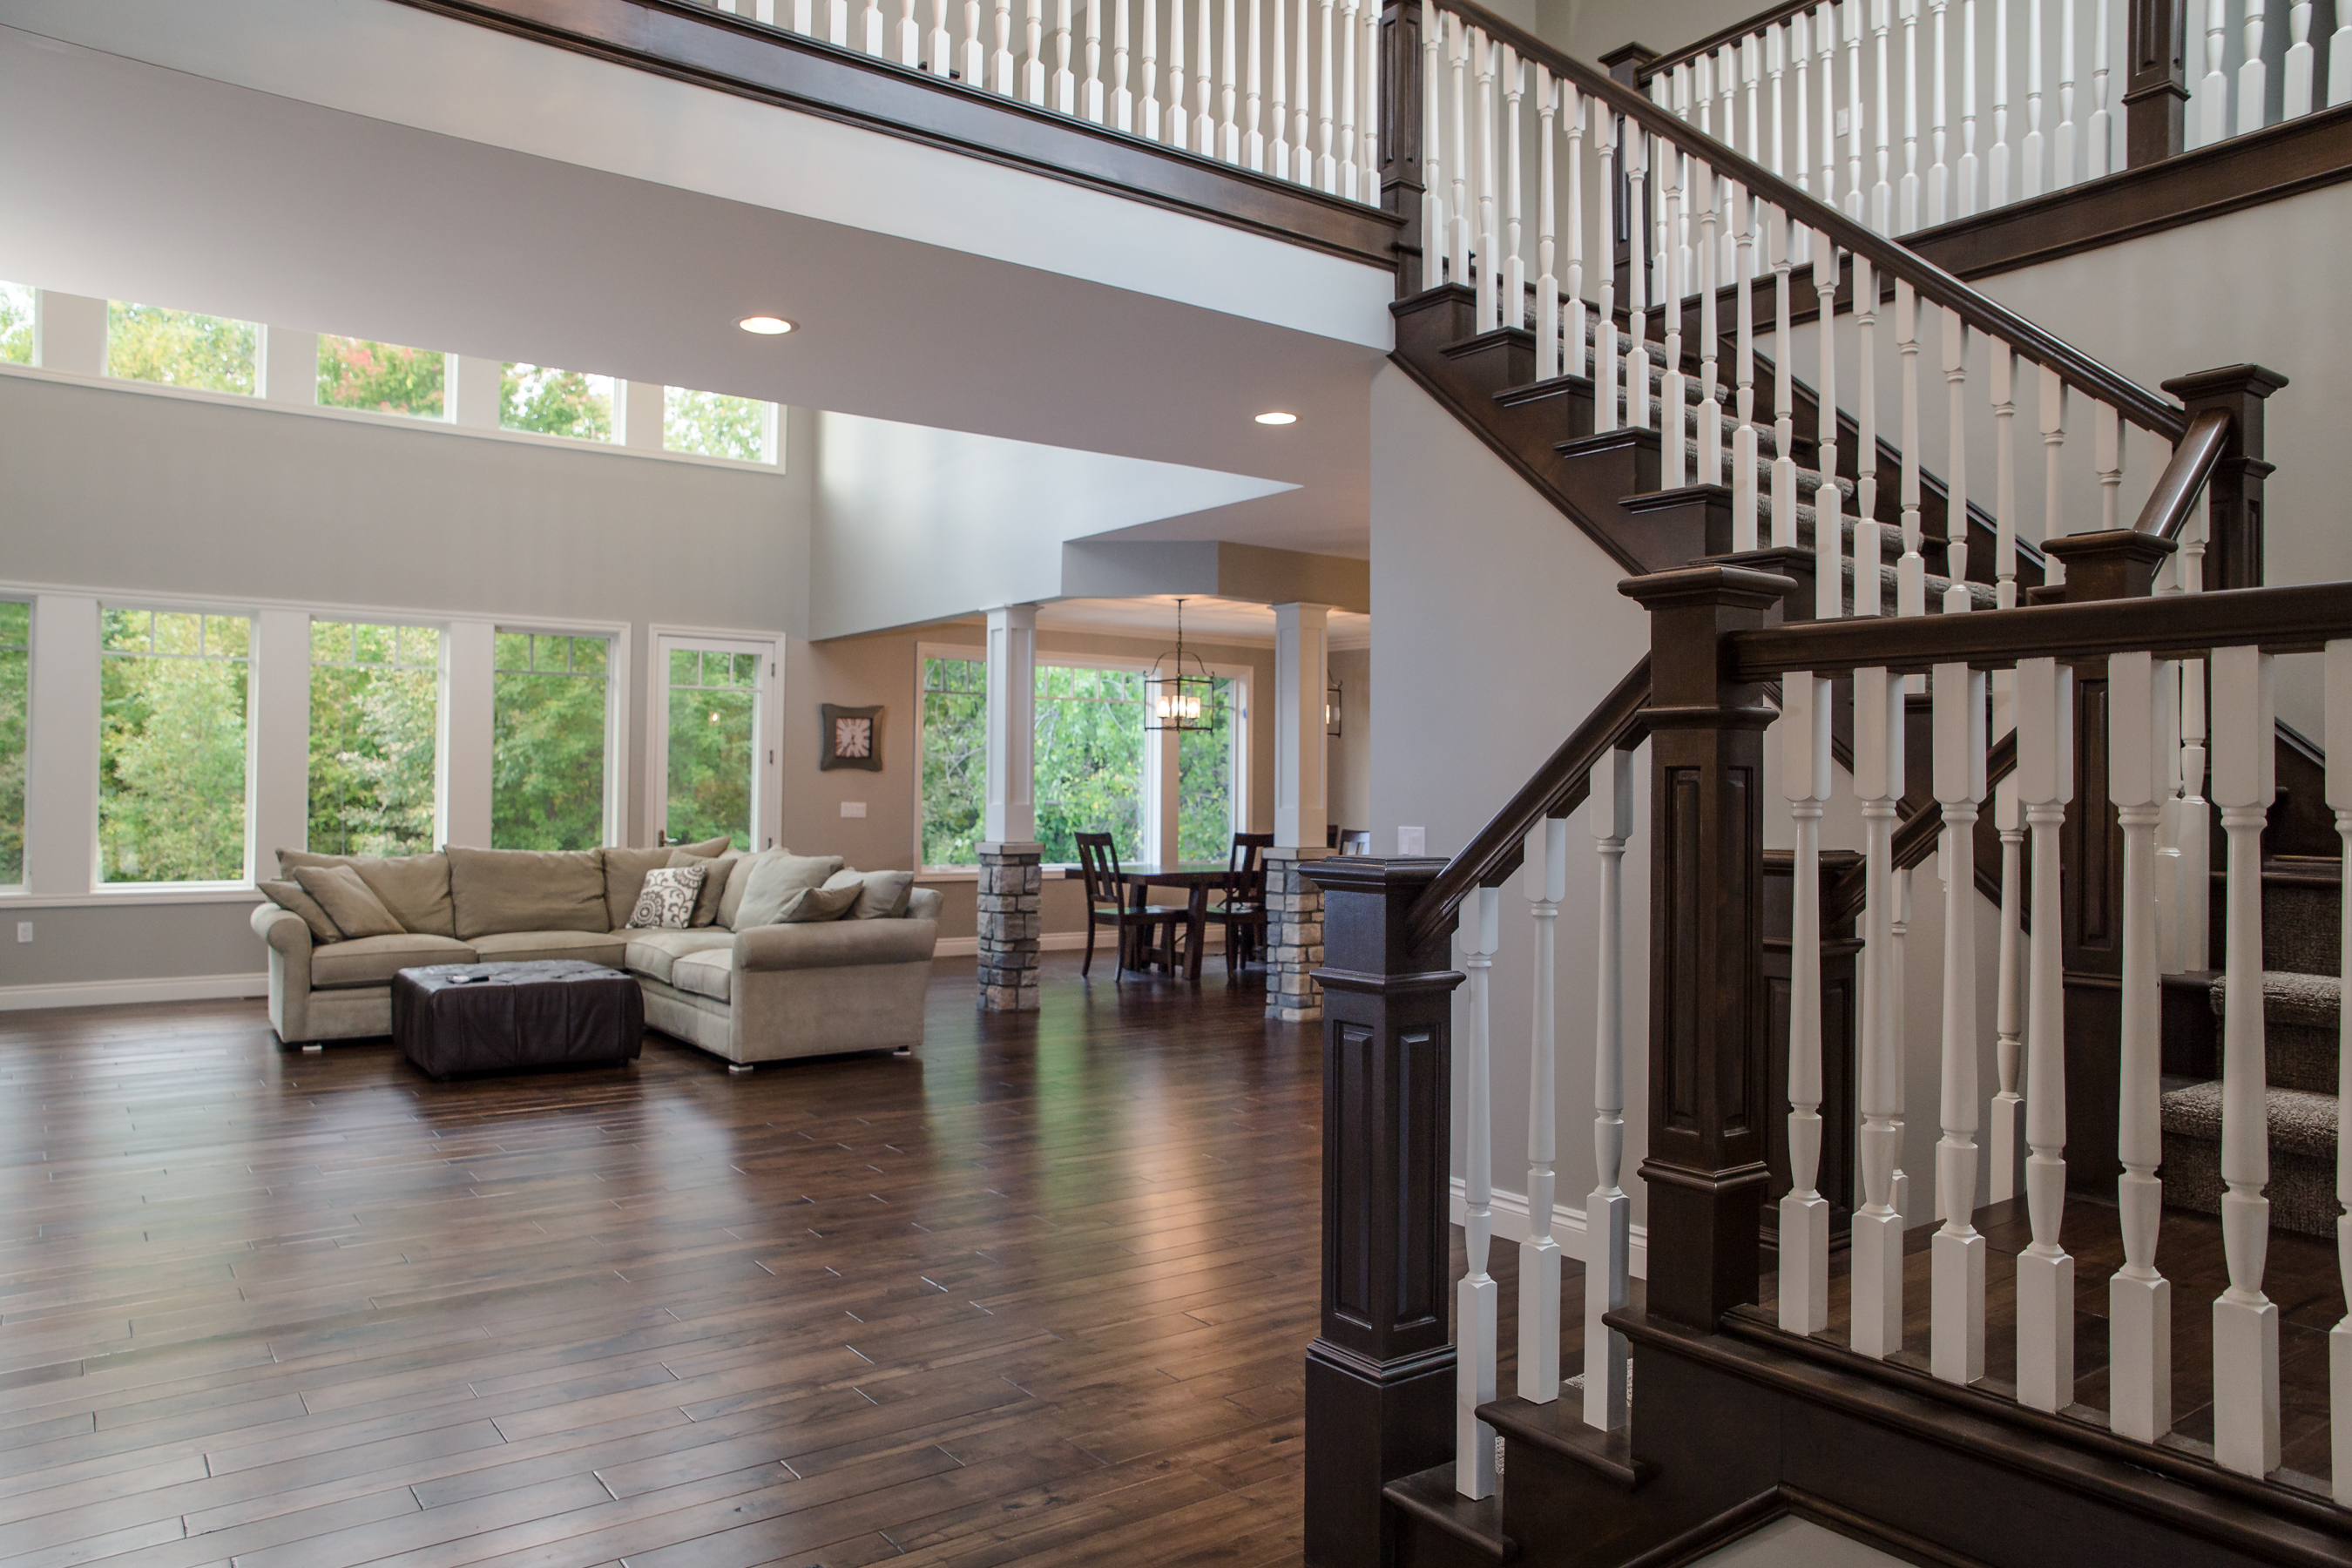 Woodline Building Company Project: Two-Story Craftsman Foyer